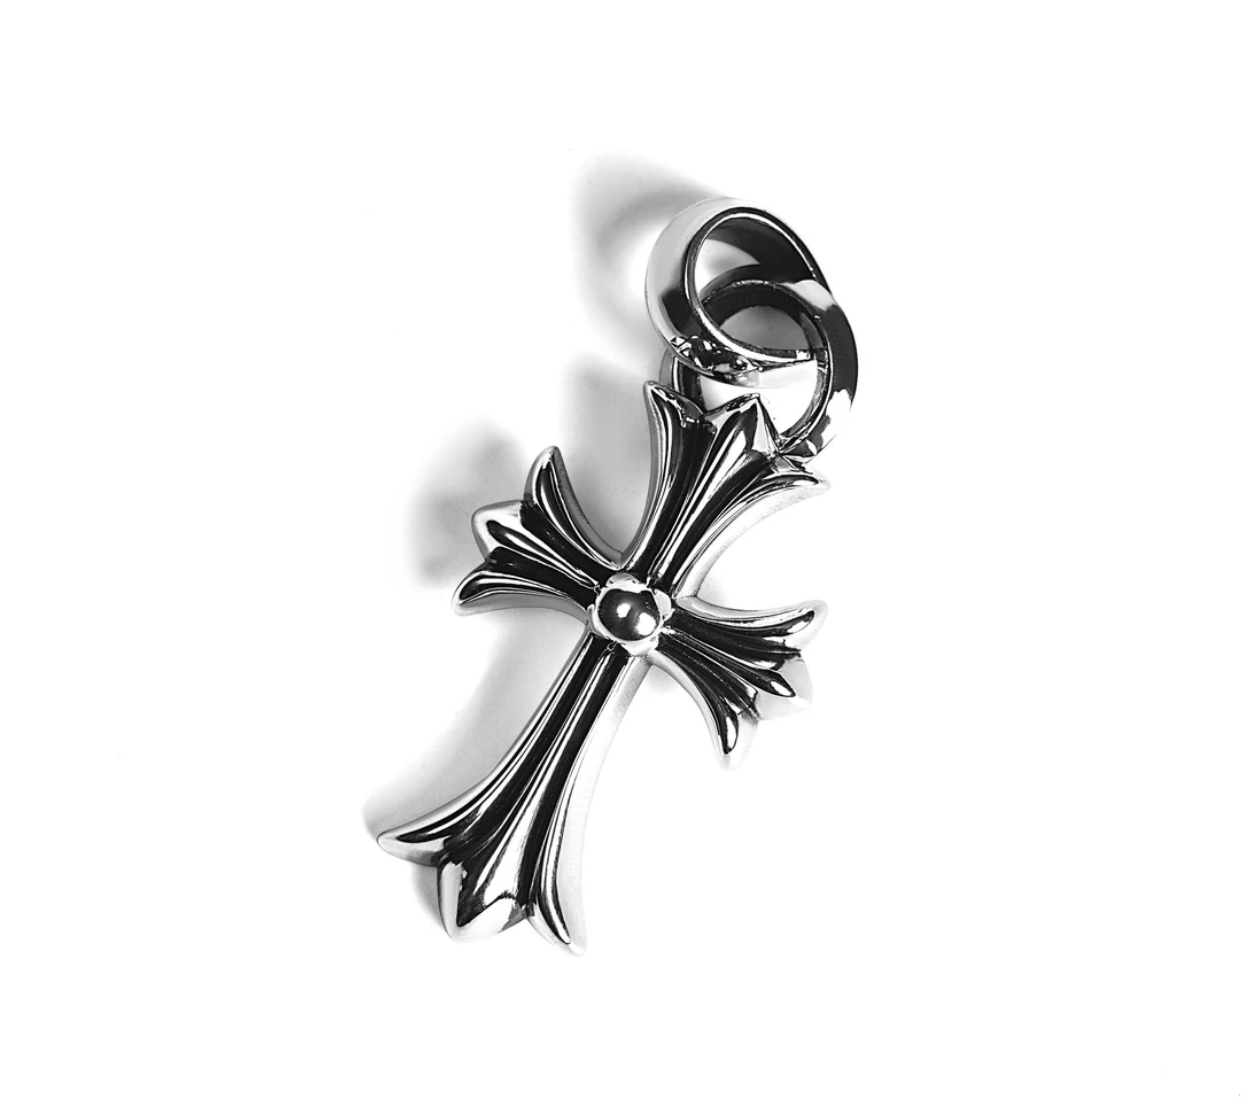 Chrome Hearts small cross pendant with bail